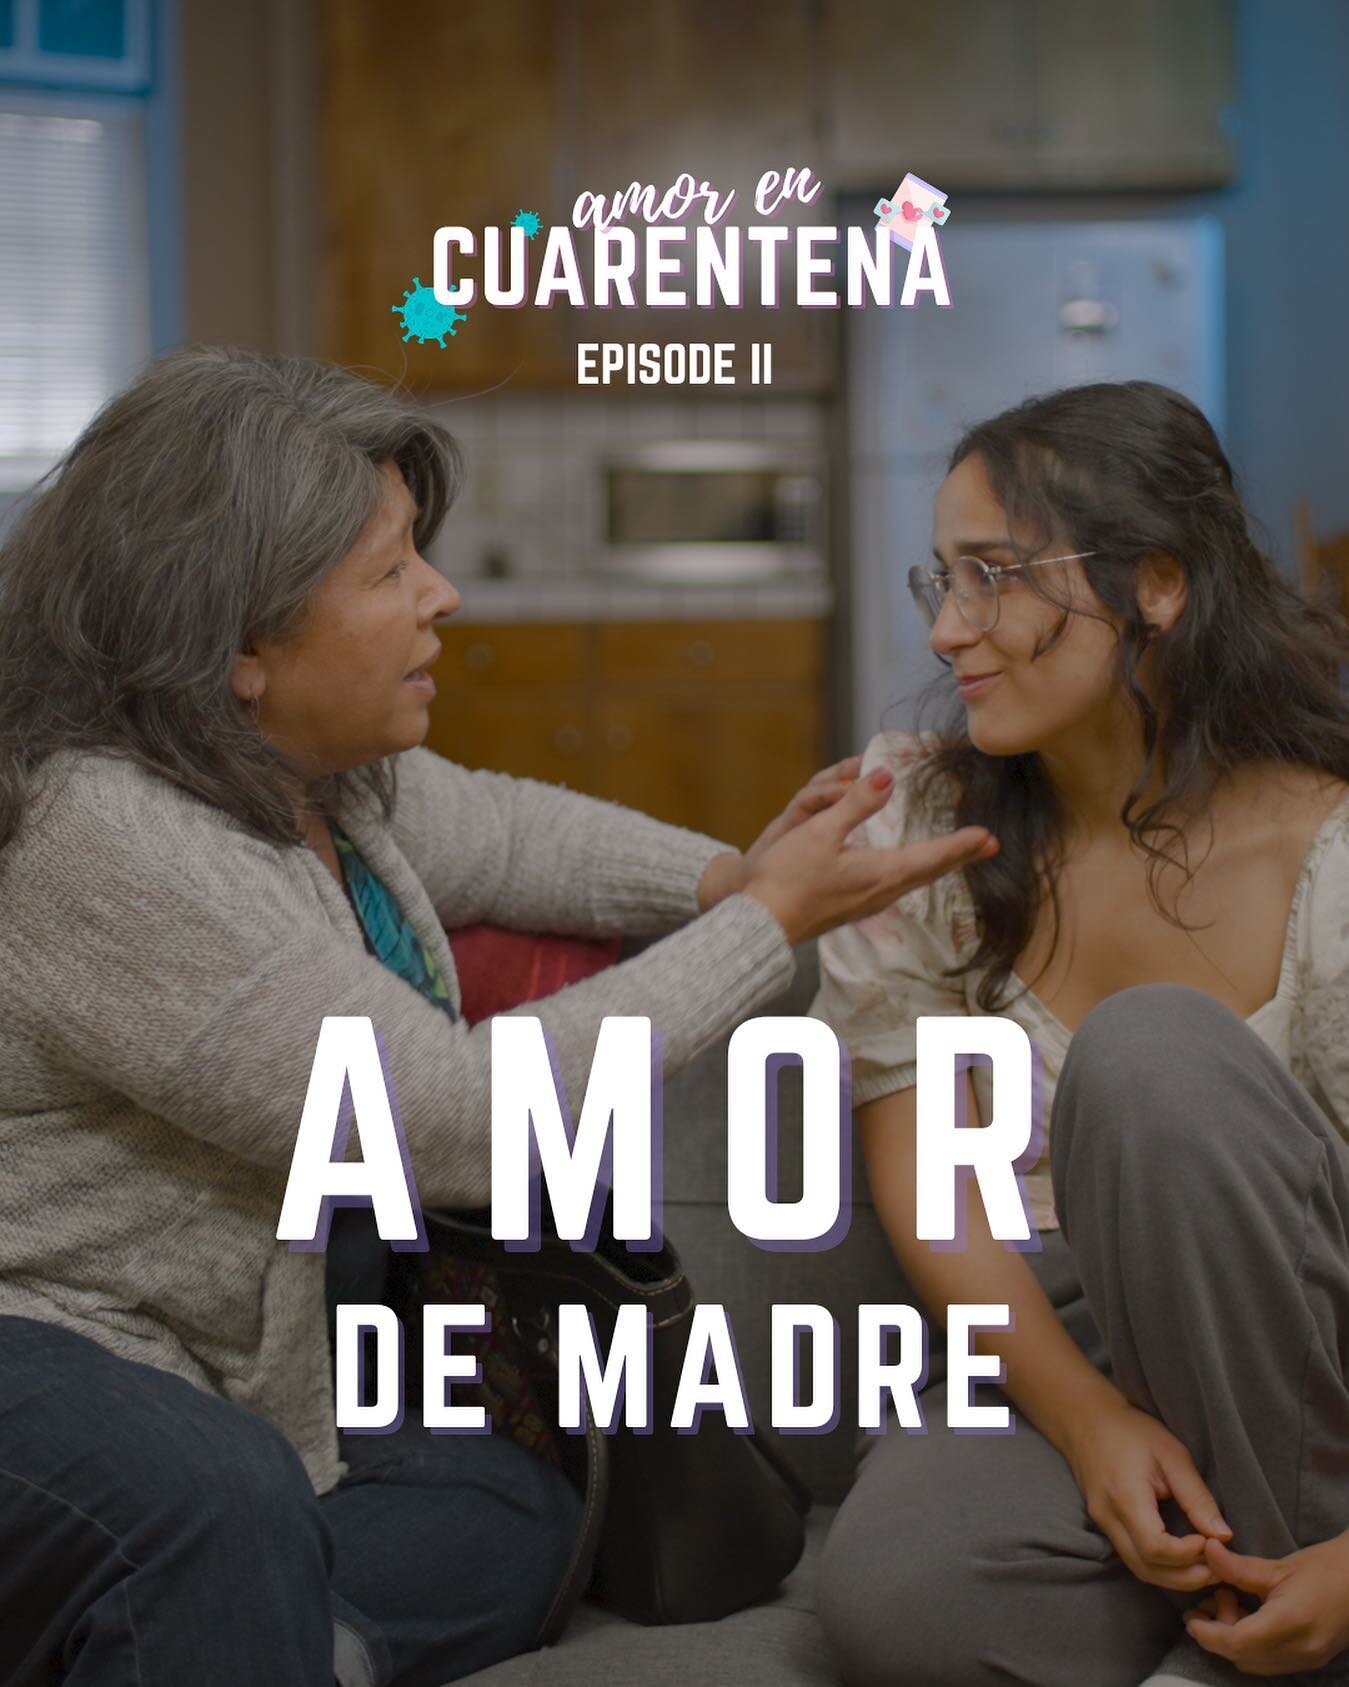 Did you see Amor en Cuarentena&rsquo;s pilot episode? Our series picks up after Emi&rsquo;s failed date. 👀

On episode 2, Emi receives an unexpected visit from her mom Imelda. 💜

Cast/crew: @de_la_rente @picho41 @lupitacano92 @zammmaz @pacoserranoh